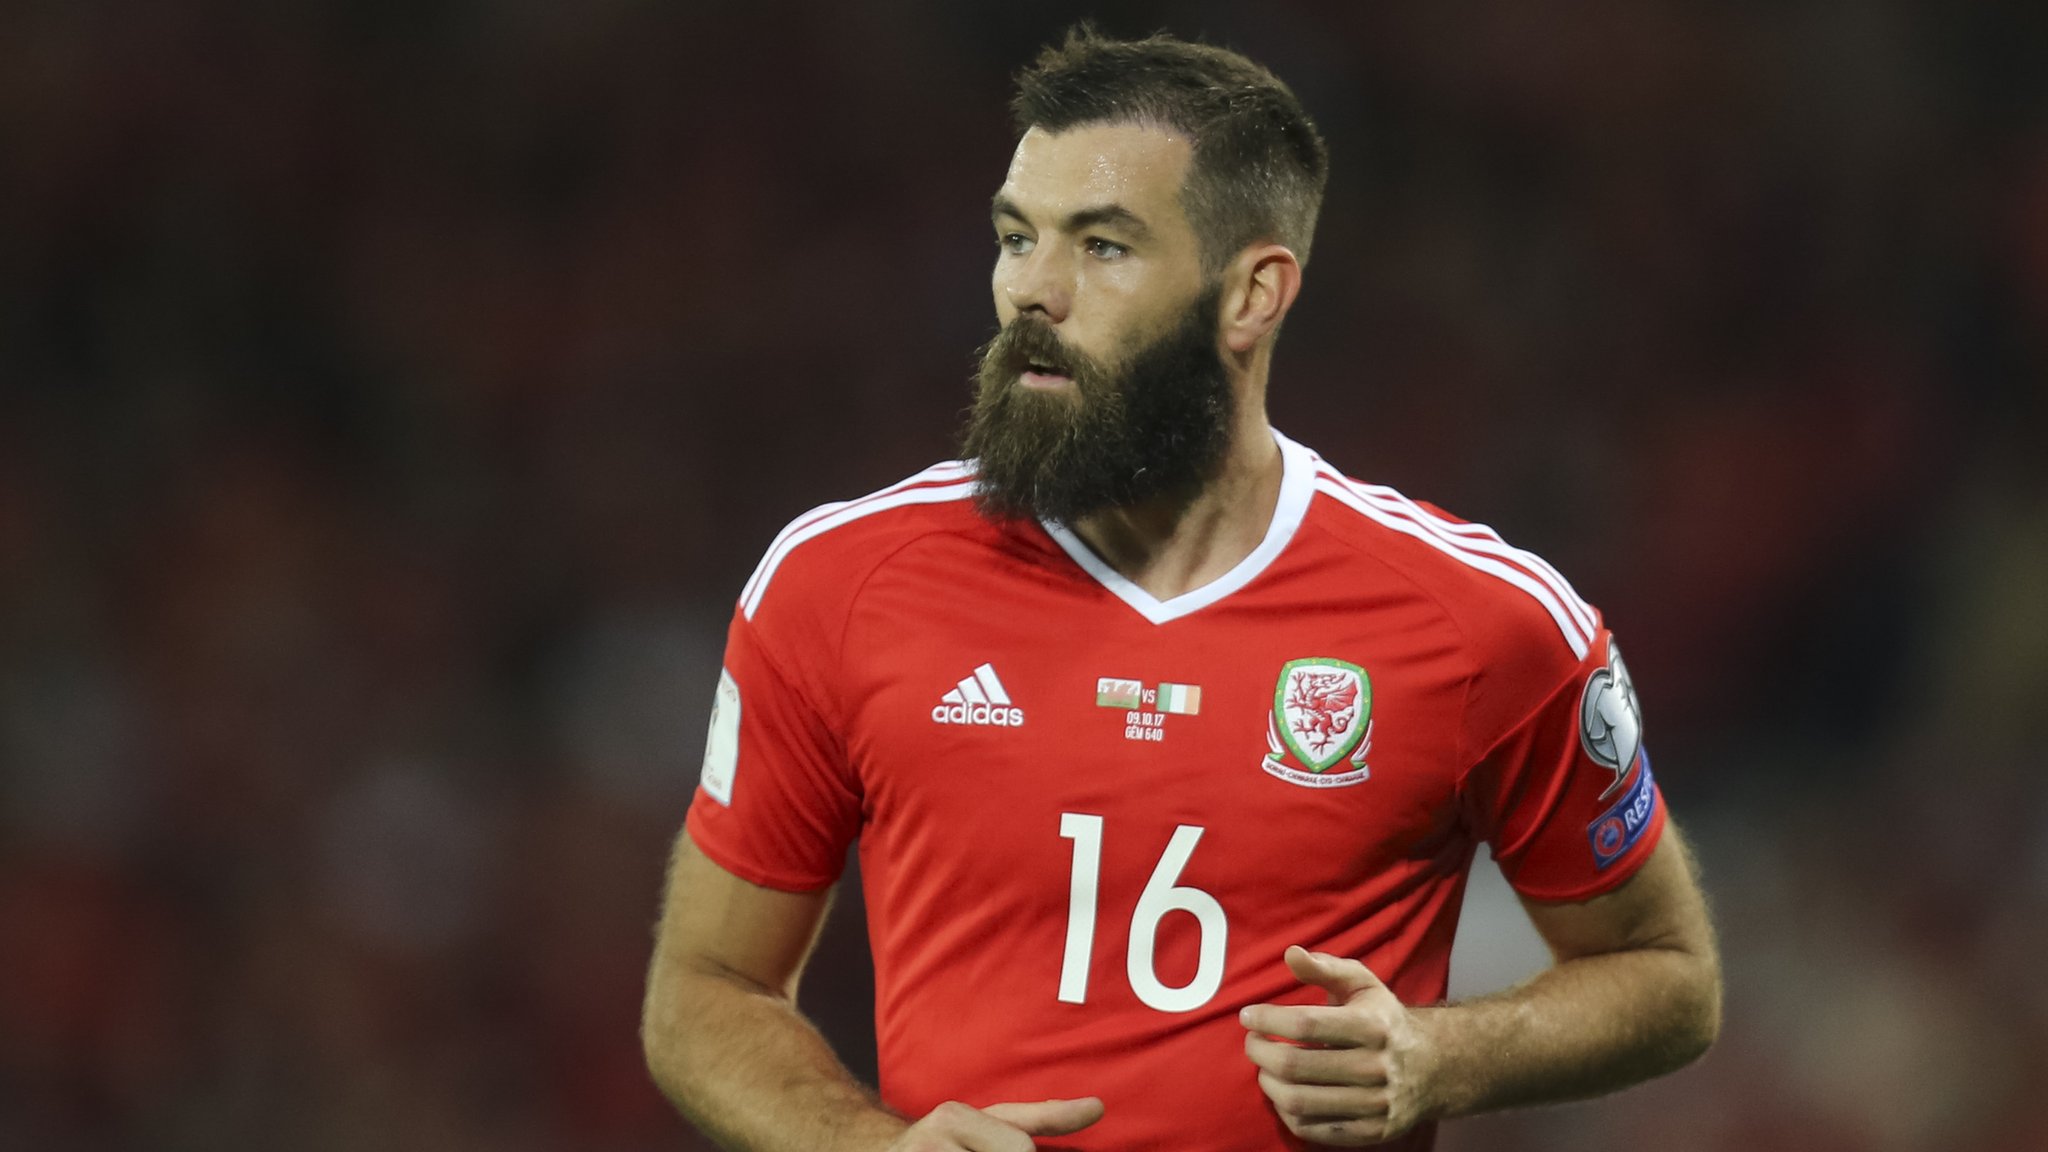 Injured Joe Ledley and Tom Lockyer out of Wales squad against Spain and Republic